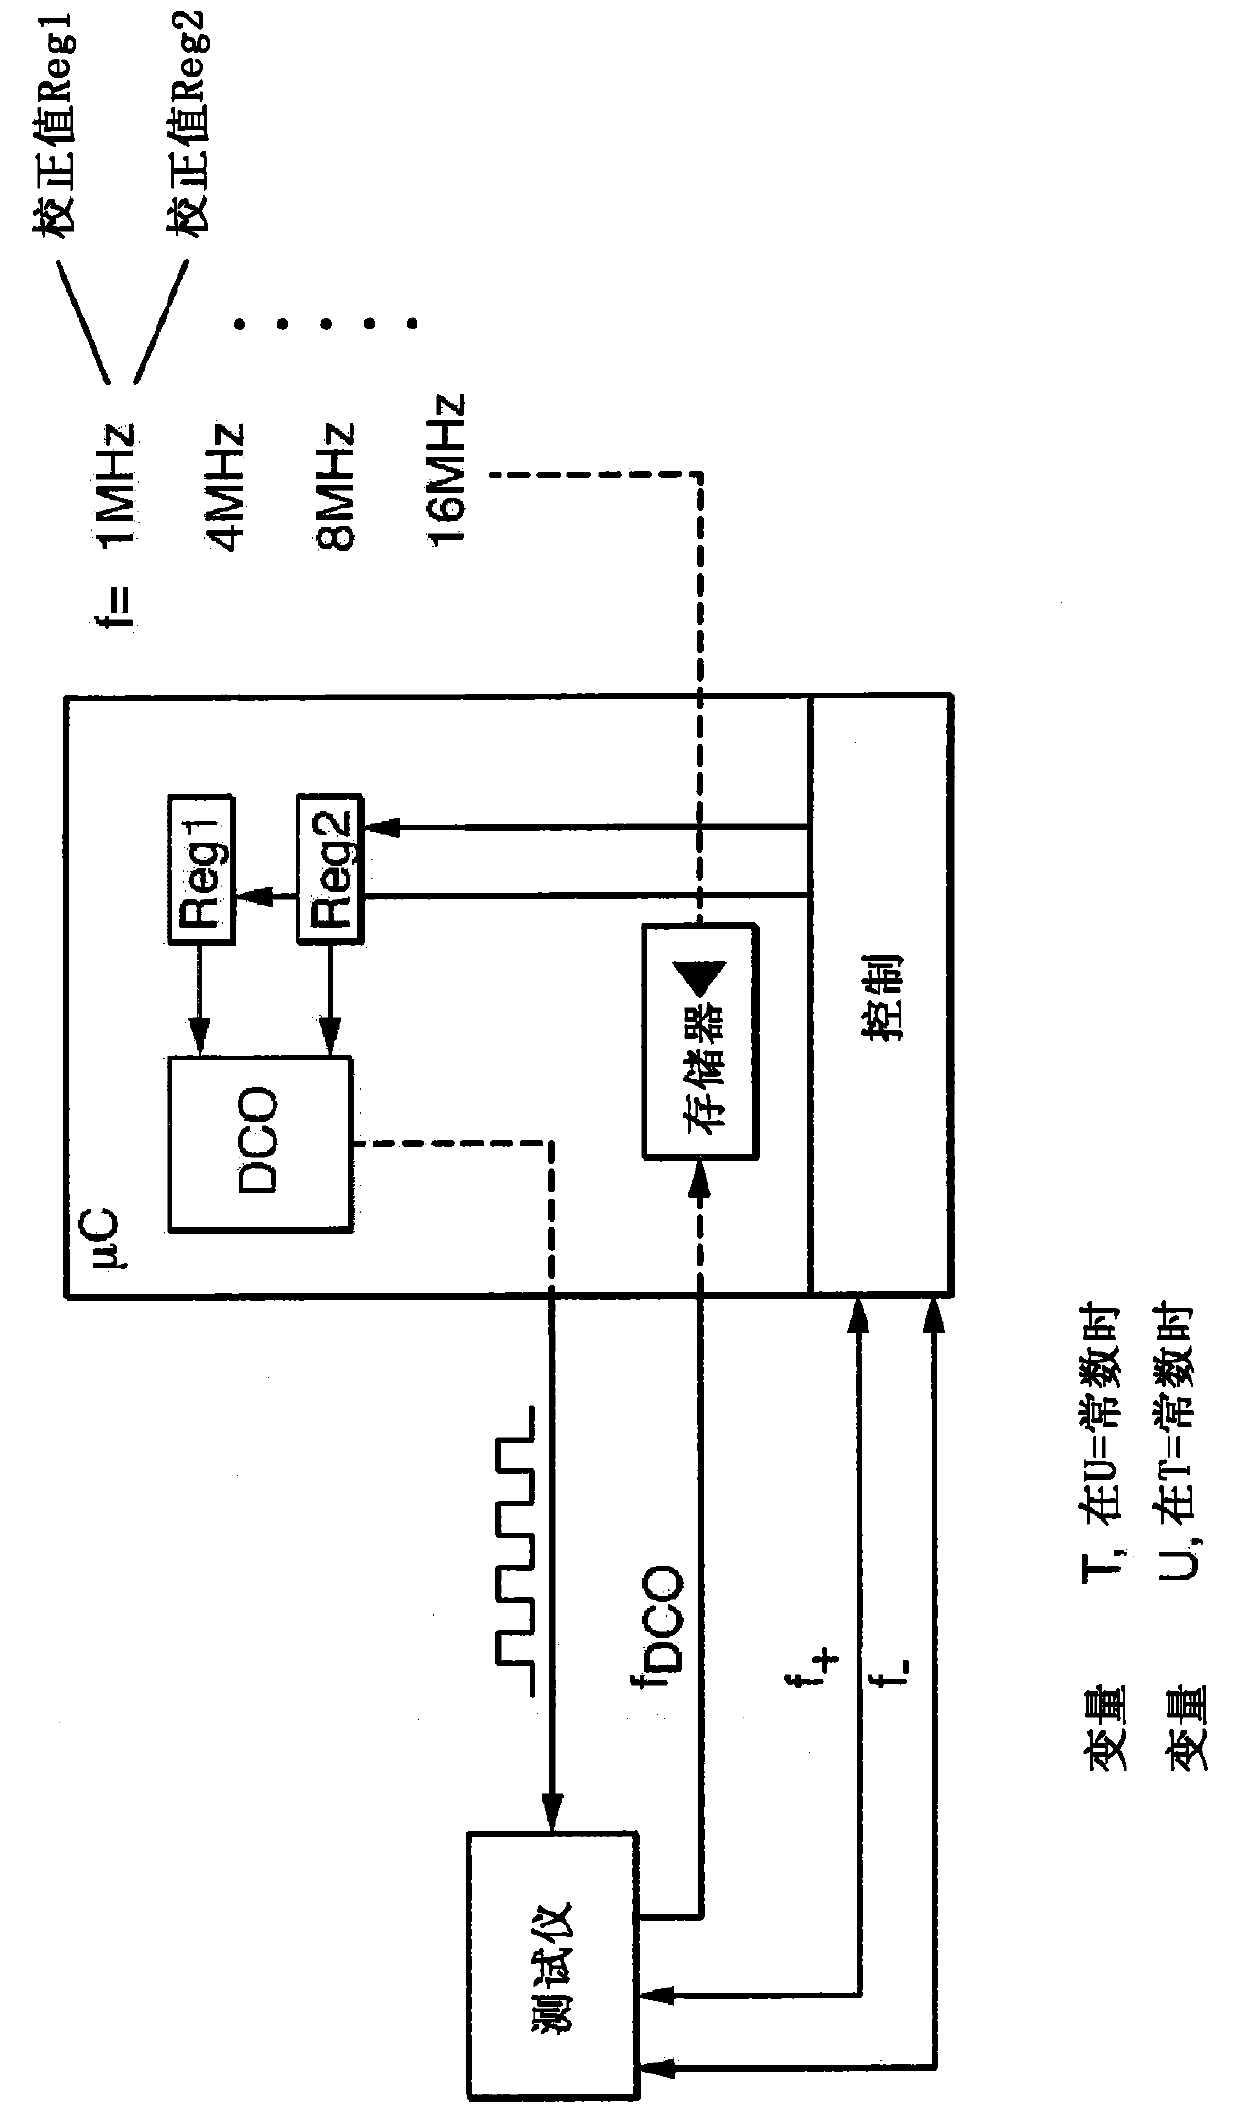 Methods of Stabilizing the Clock Frequency of Microcontrollers